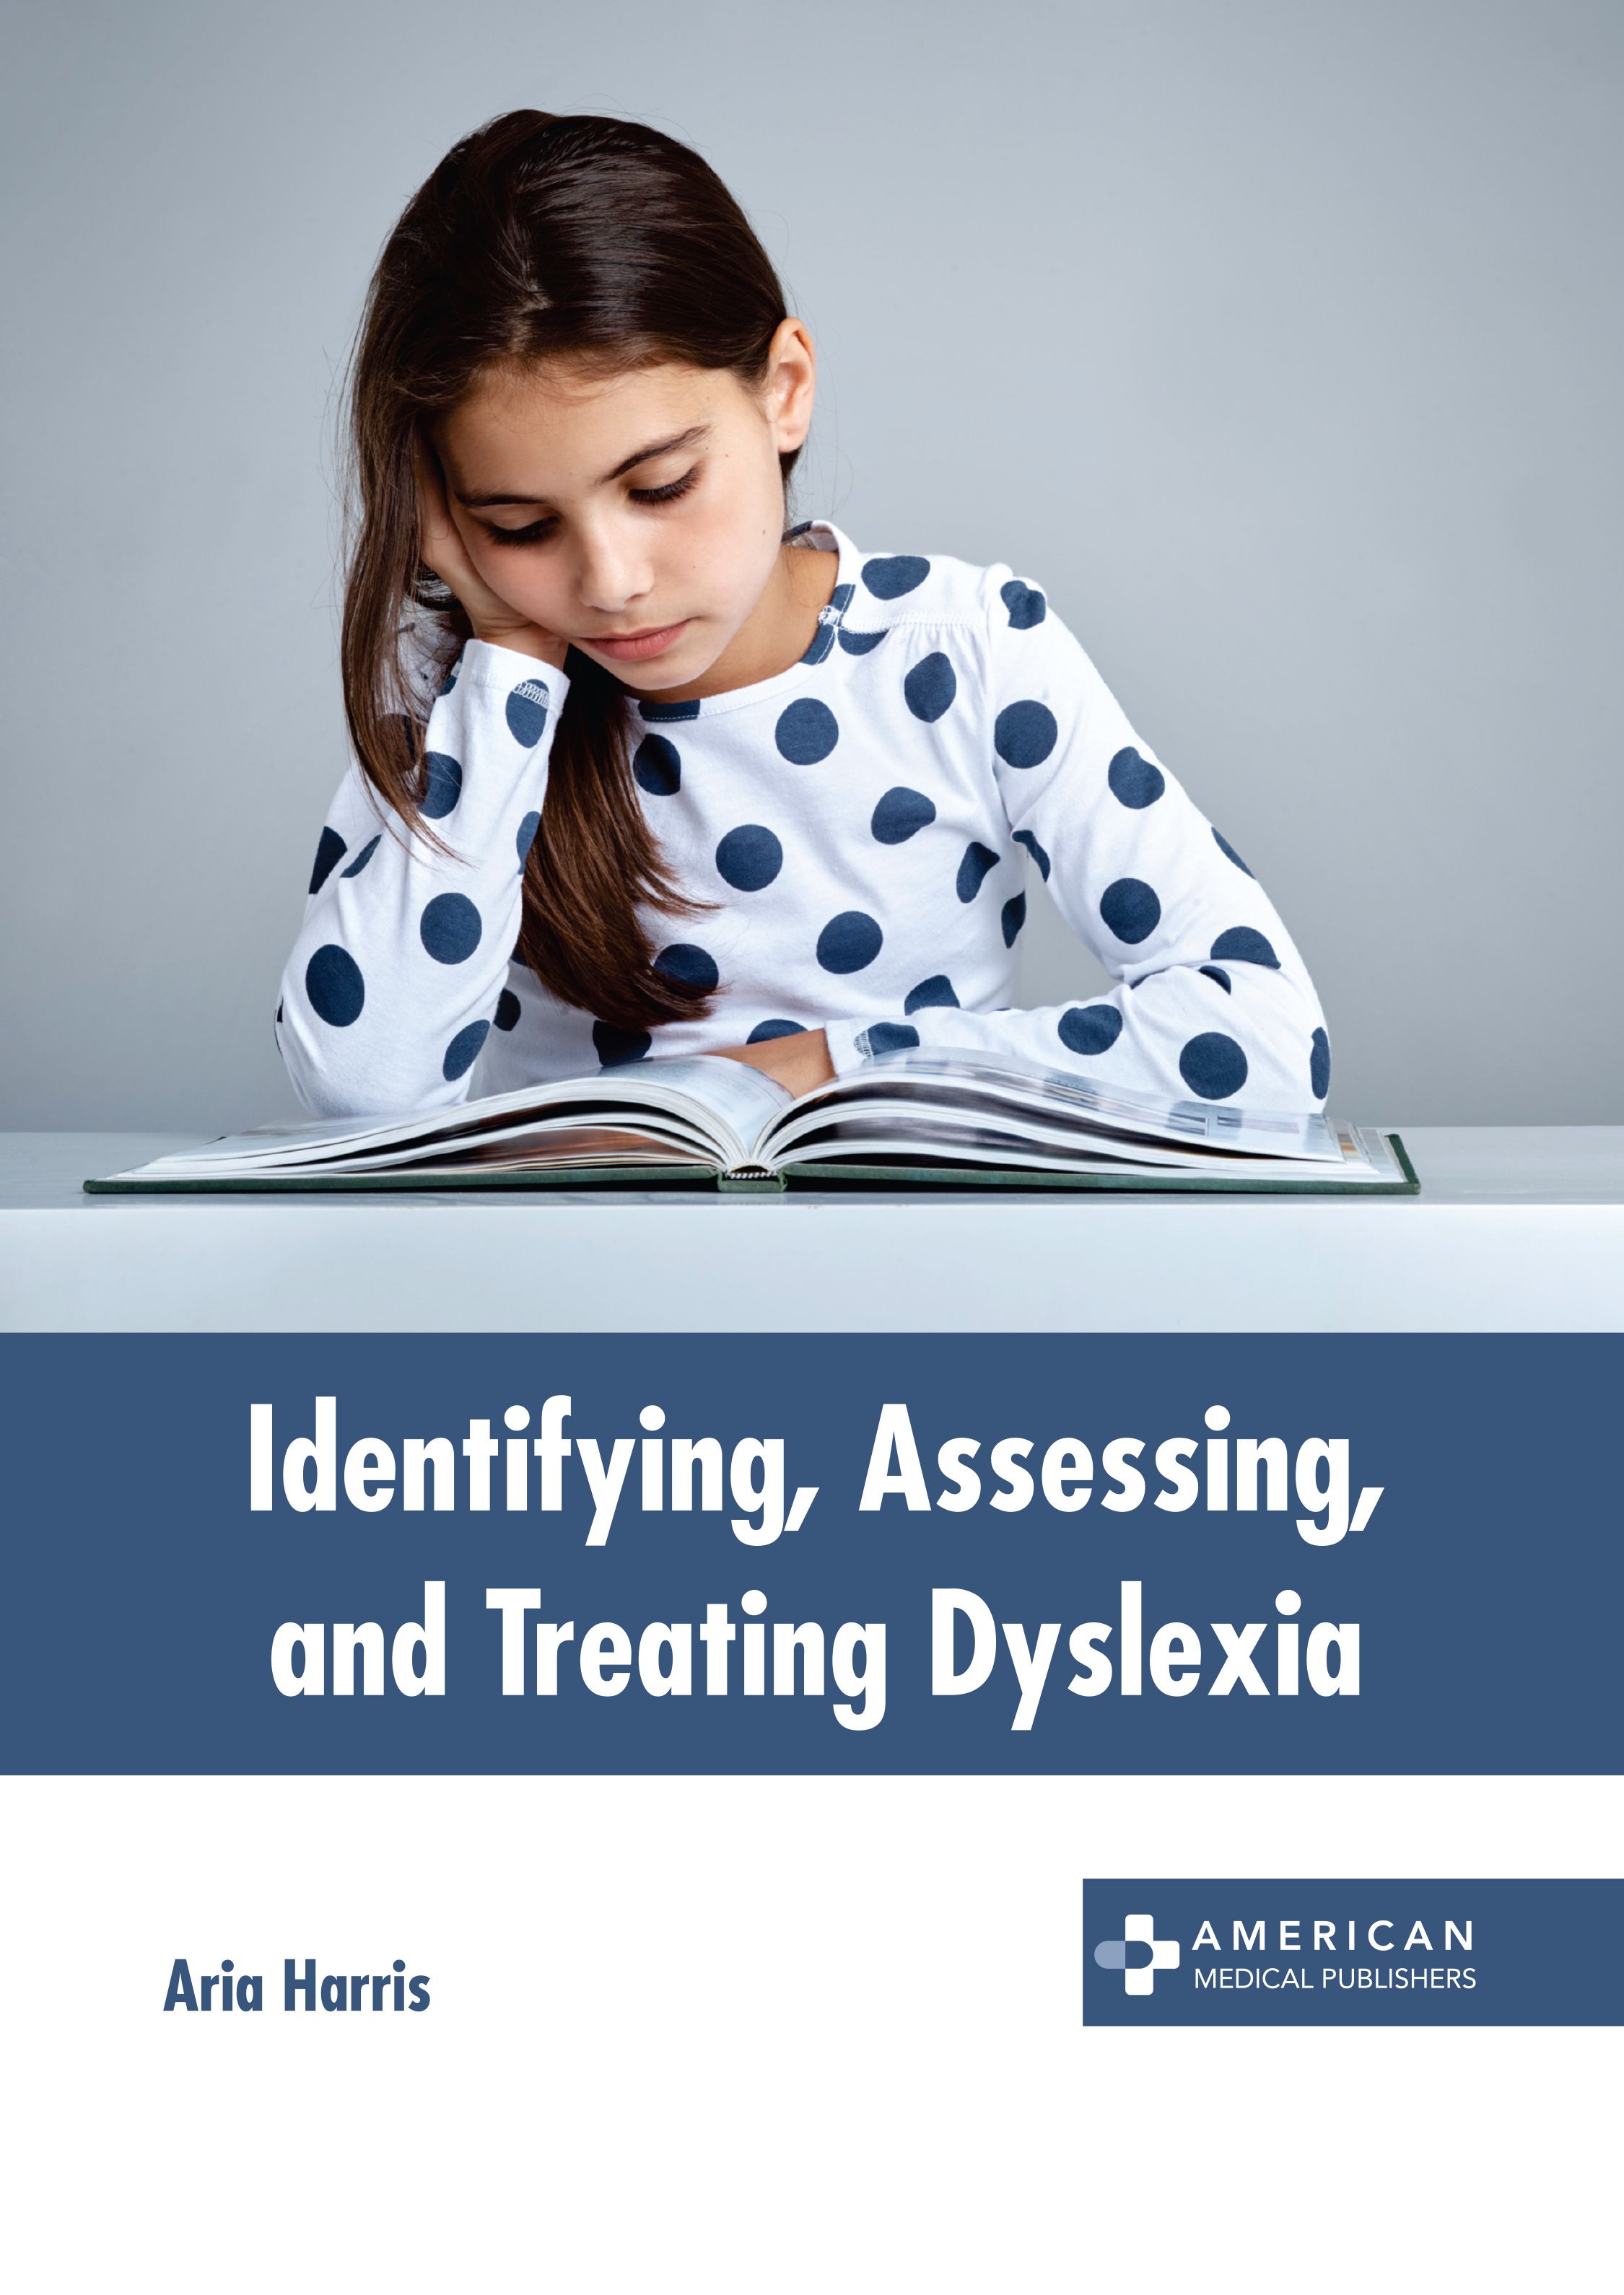 

exclusive-publishers/american-medical-publishers/identifying-assessing-and-treating-dyslexia-9798887401997